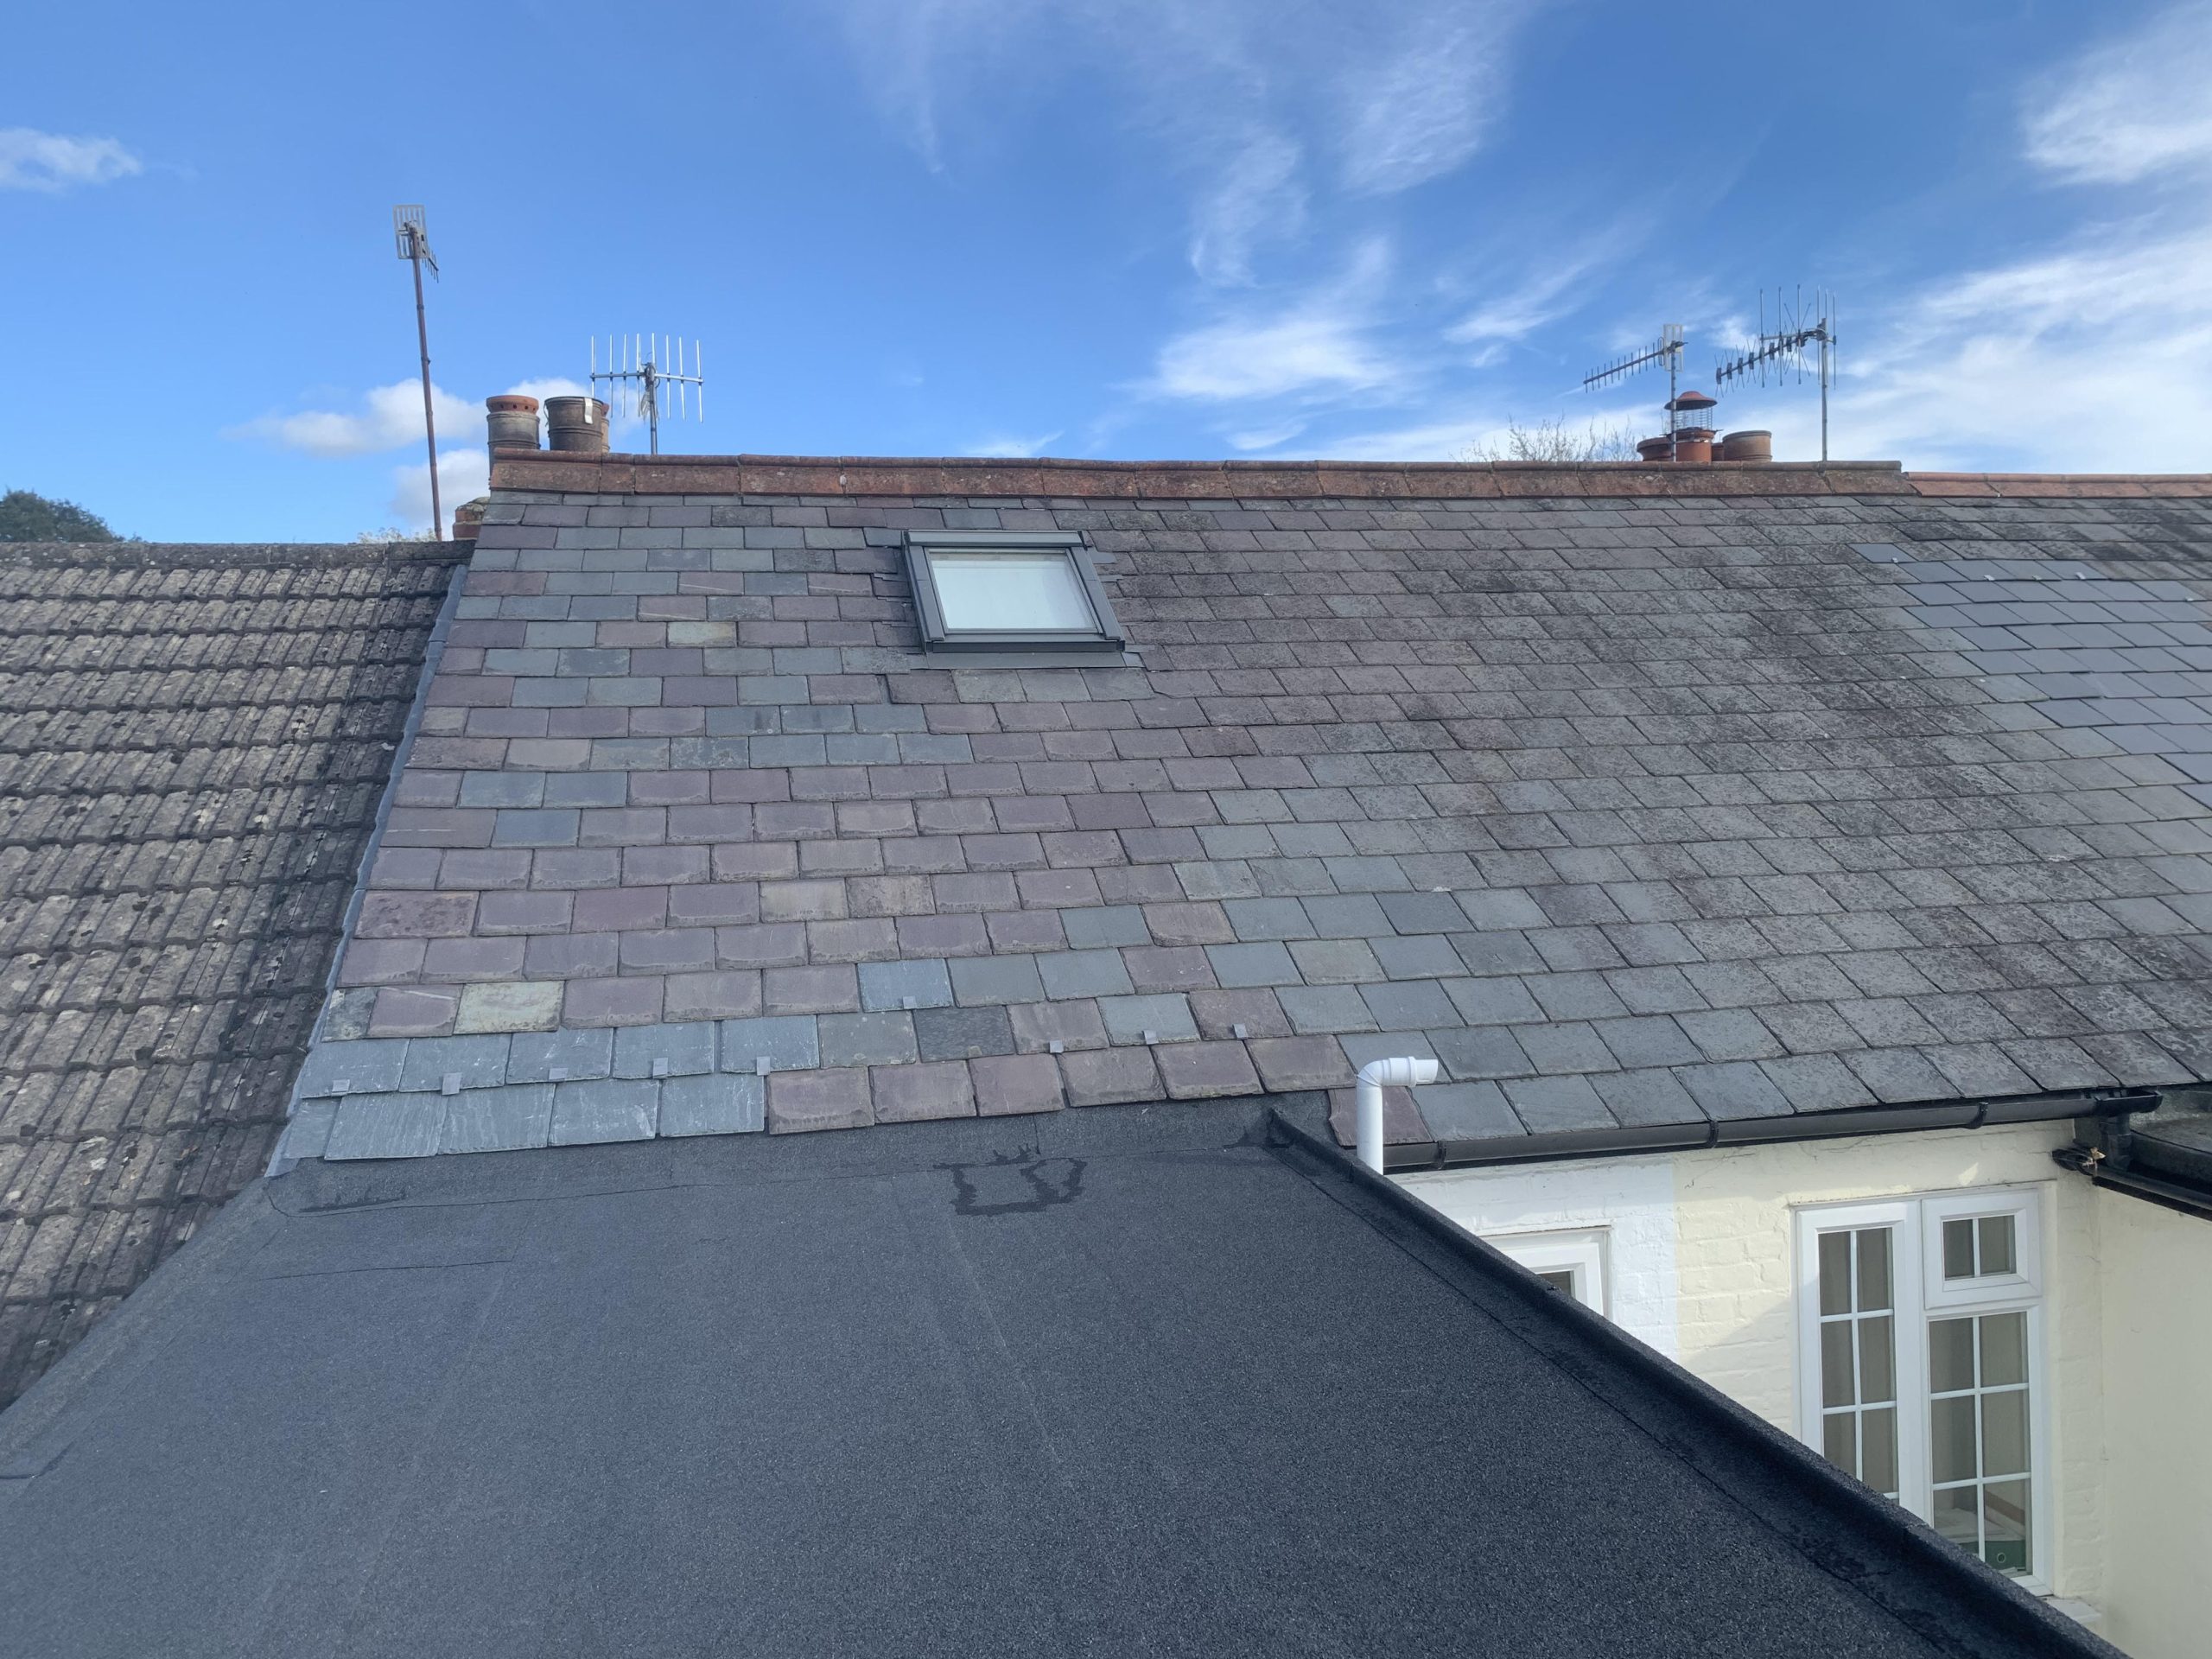 Know More About Common Types of Roof Repairs in Horsham